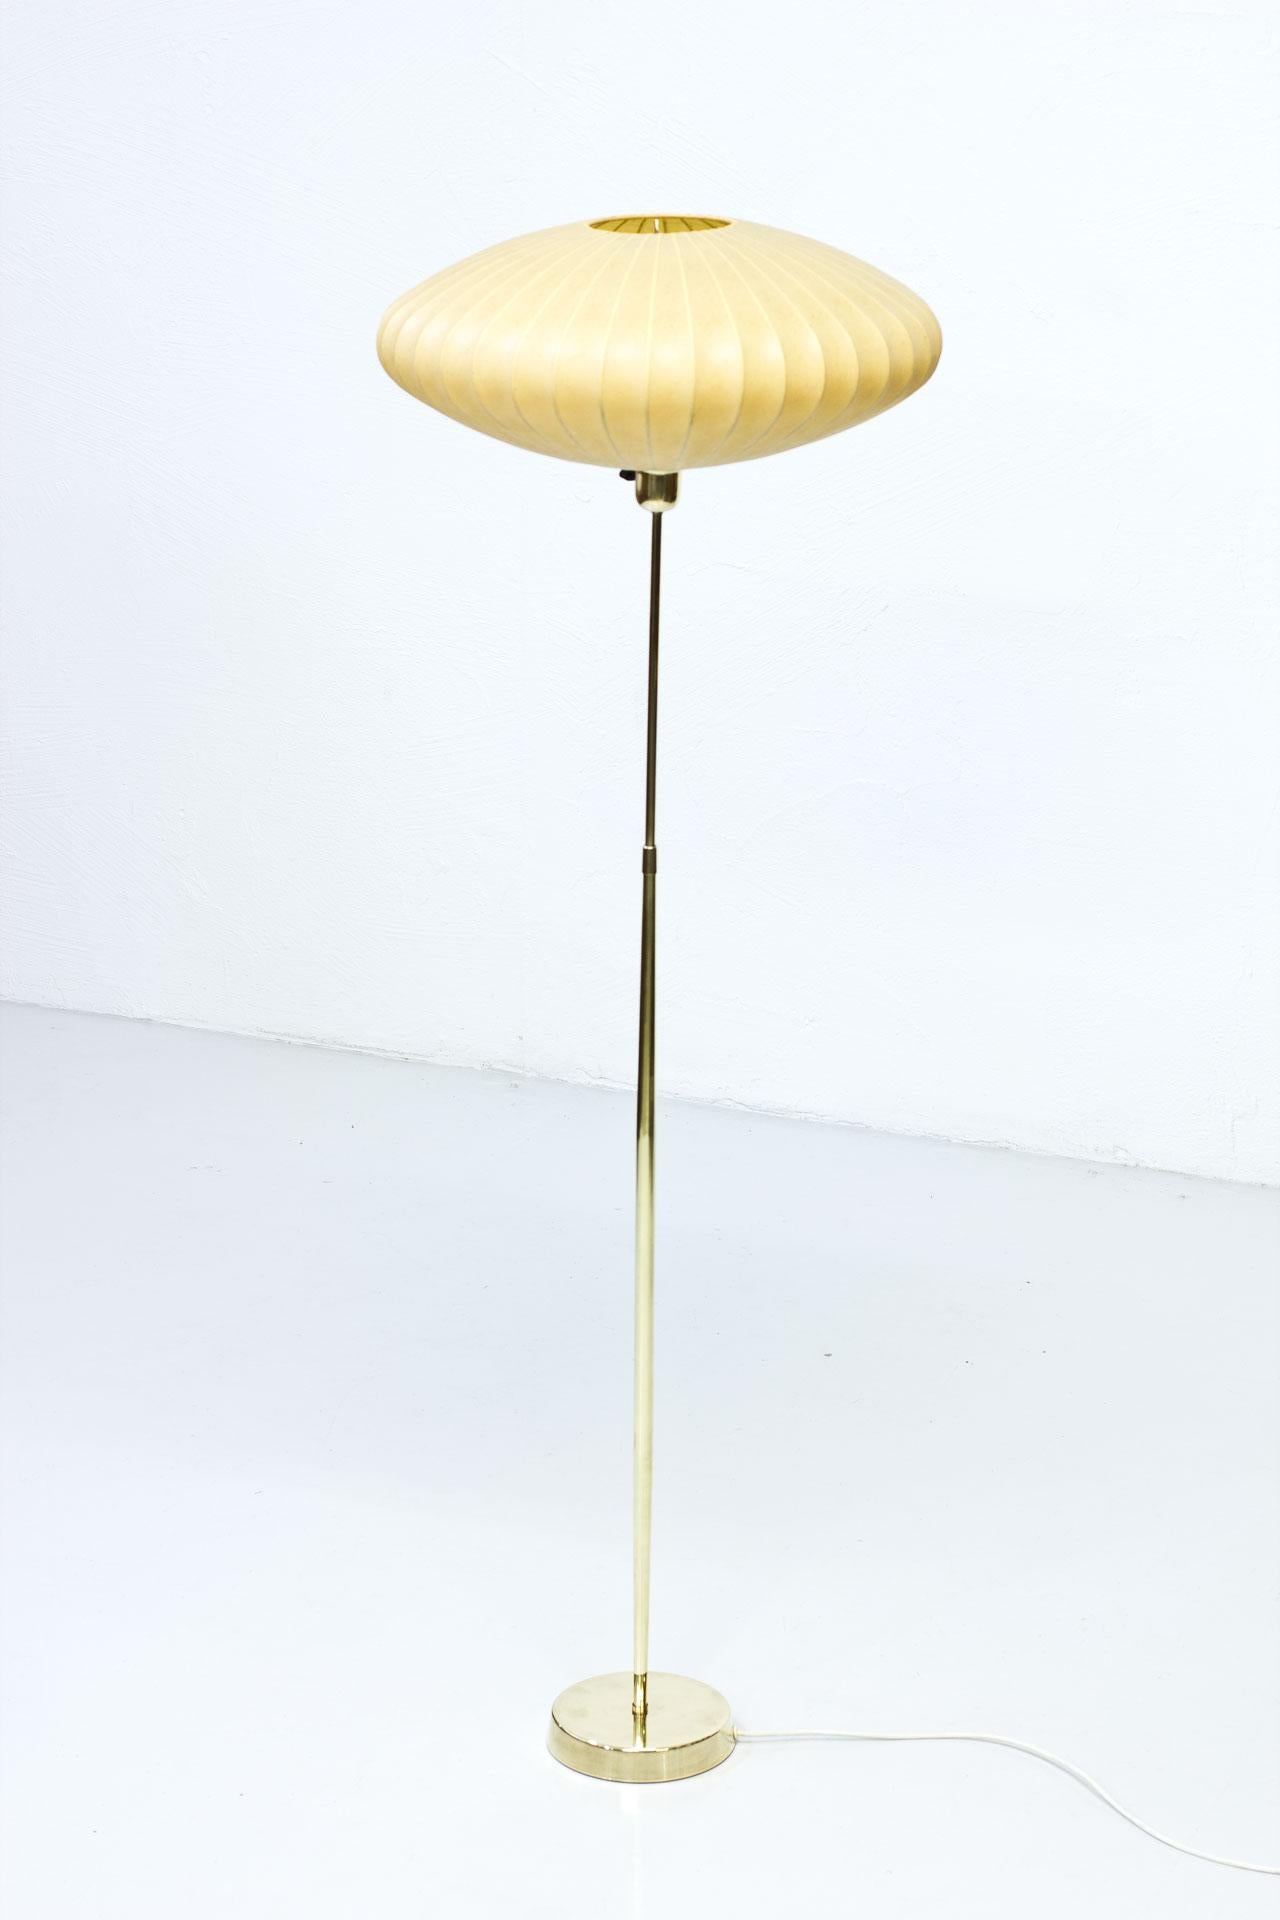 Floor lamp produced by ASEA belysning in Sweden during the 1950s. Polished brass stem. Cocoon sprayed plastic shade. Rewired. Light switch on the brass fitting.